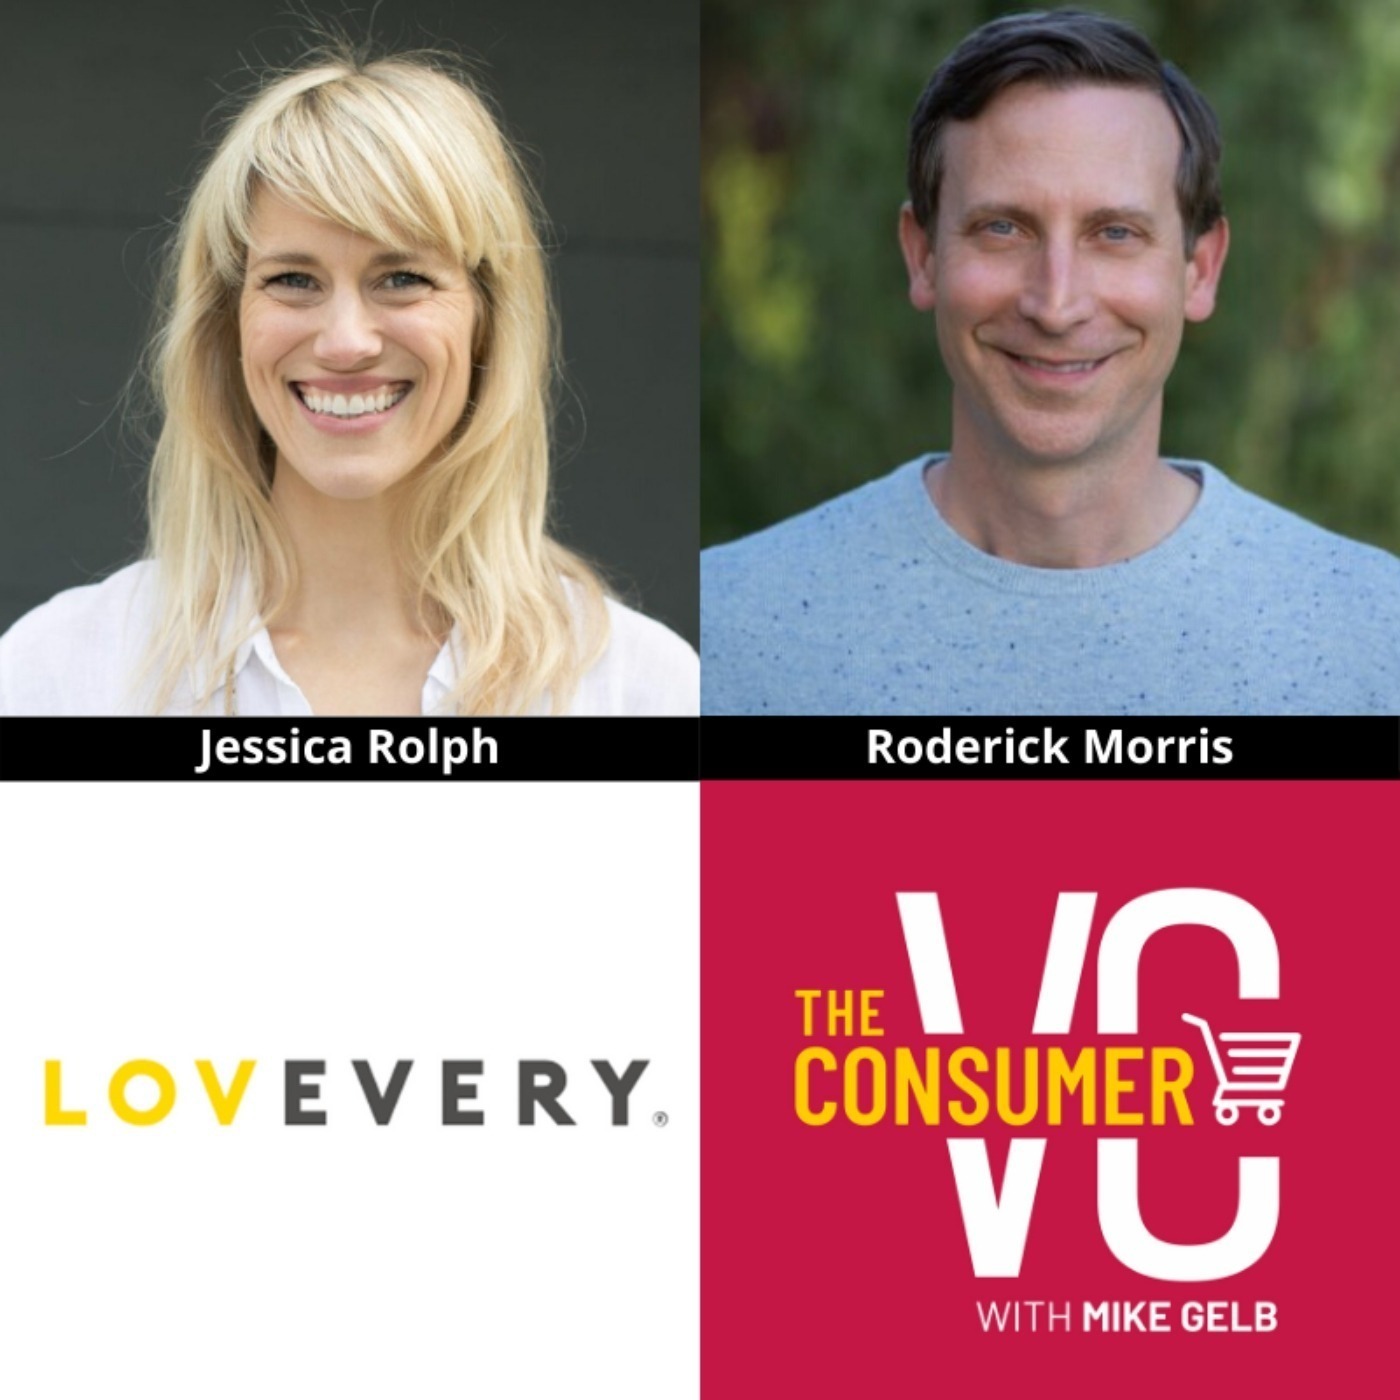 Jessica Rolph and Roderick Morris (Lovevery) - Building Toys For Different Stages of a Child's Development, Advice When Co-Founding A Company, and Their Approach to Fundraising